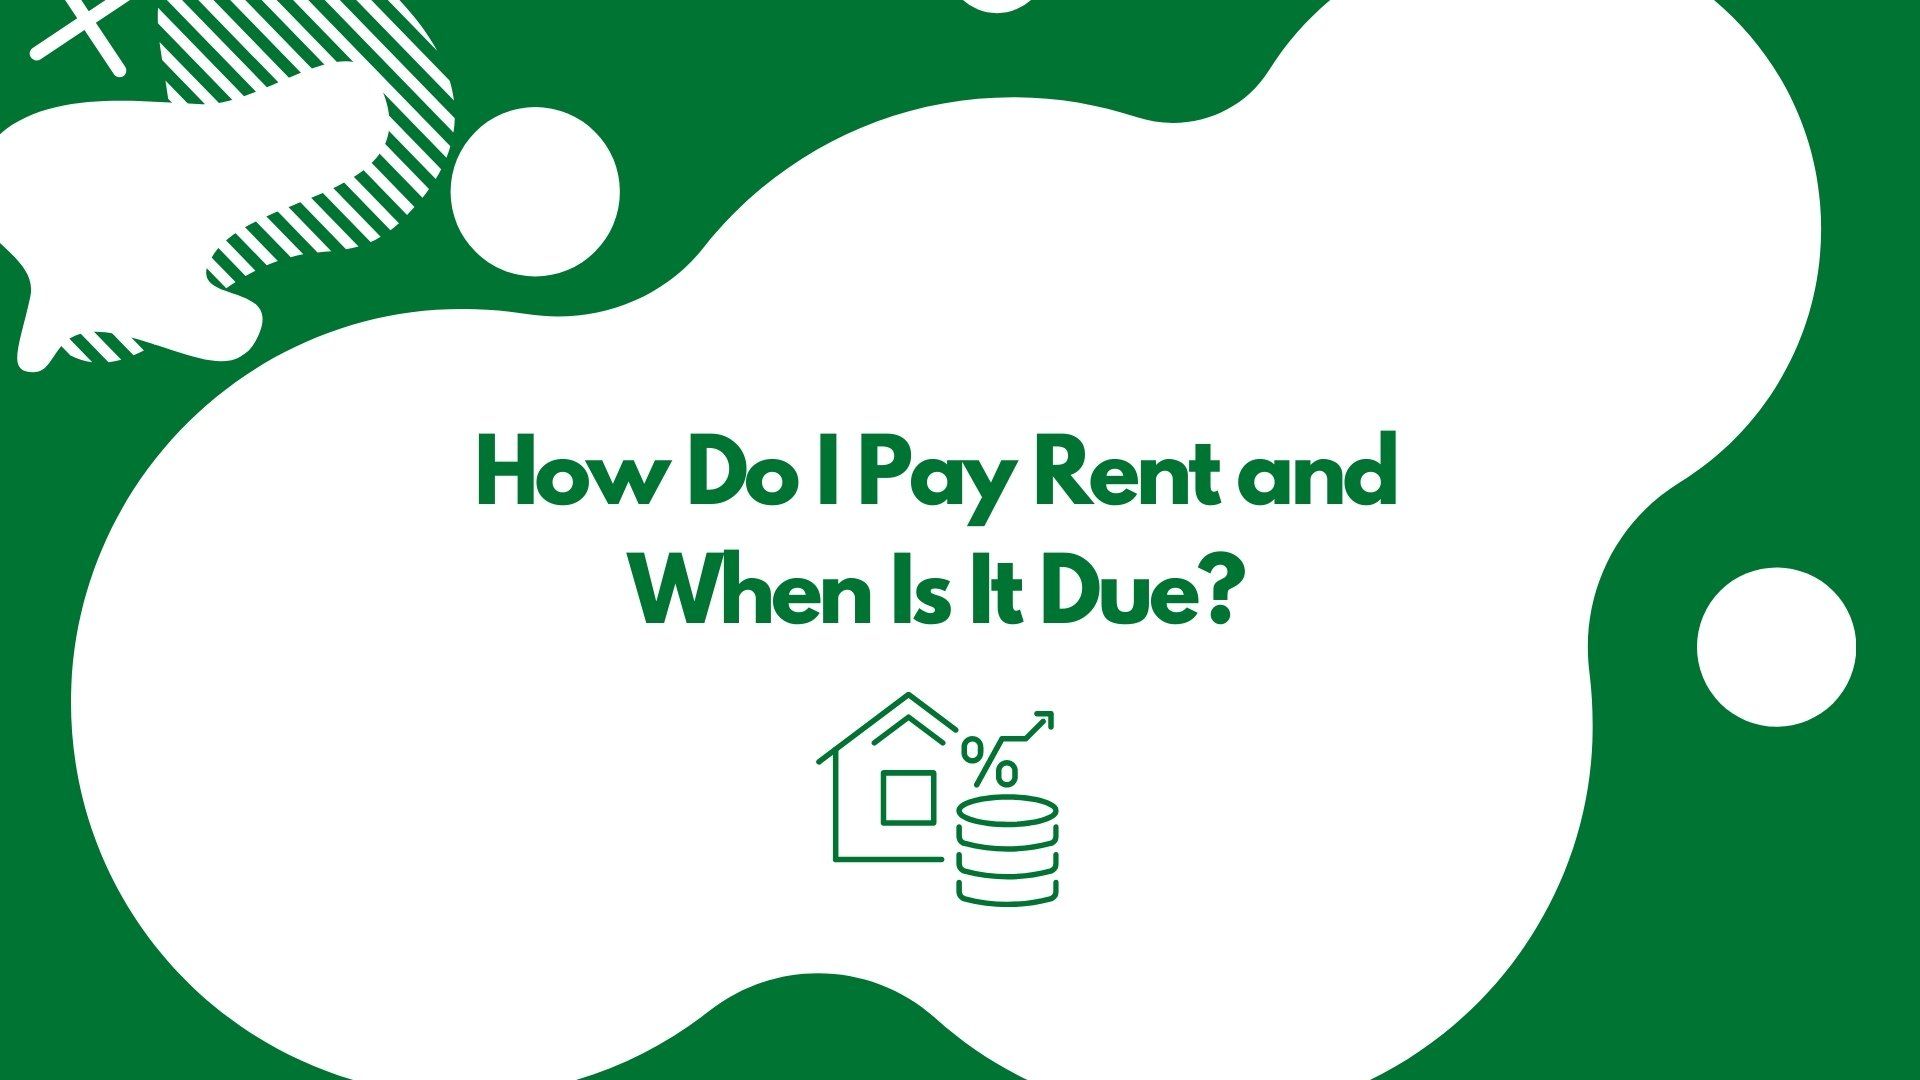 How do I pay rent and when is it due.